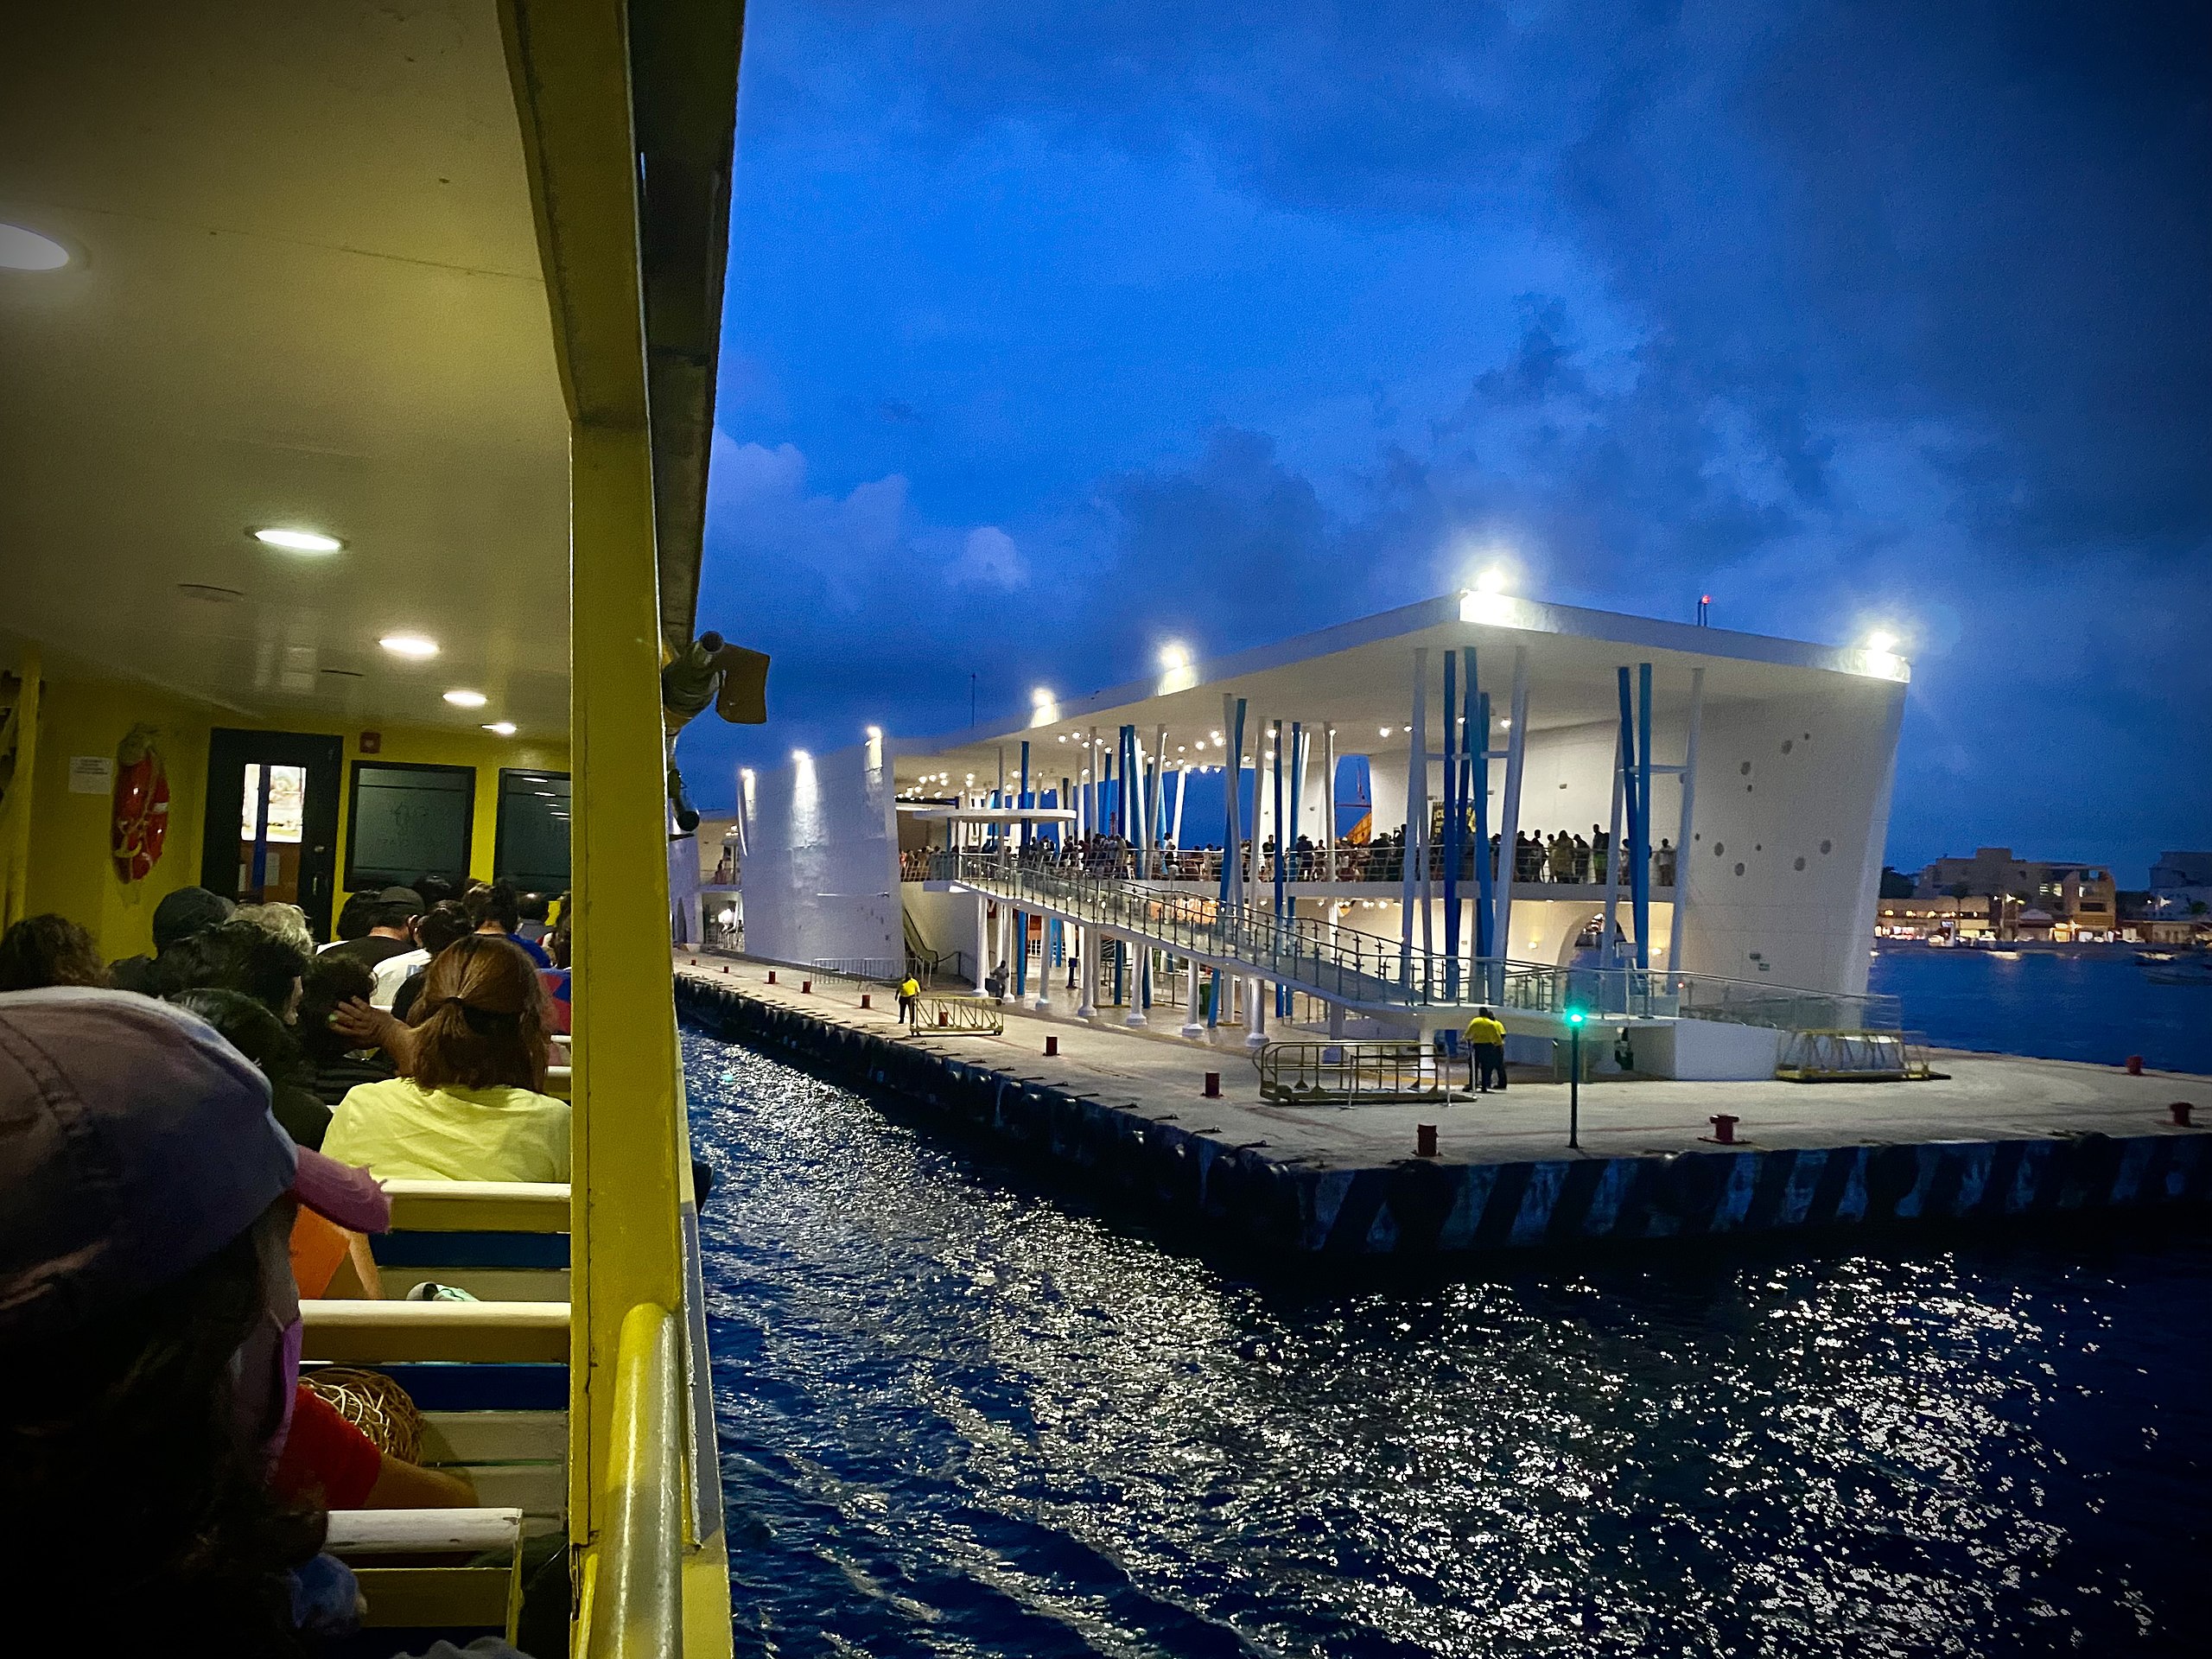 File:Arriving at Cozumel Ferry Dock, San Miguel de Cozumel, Quintana Roo,   - Wikimedia Commons